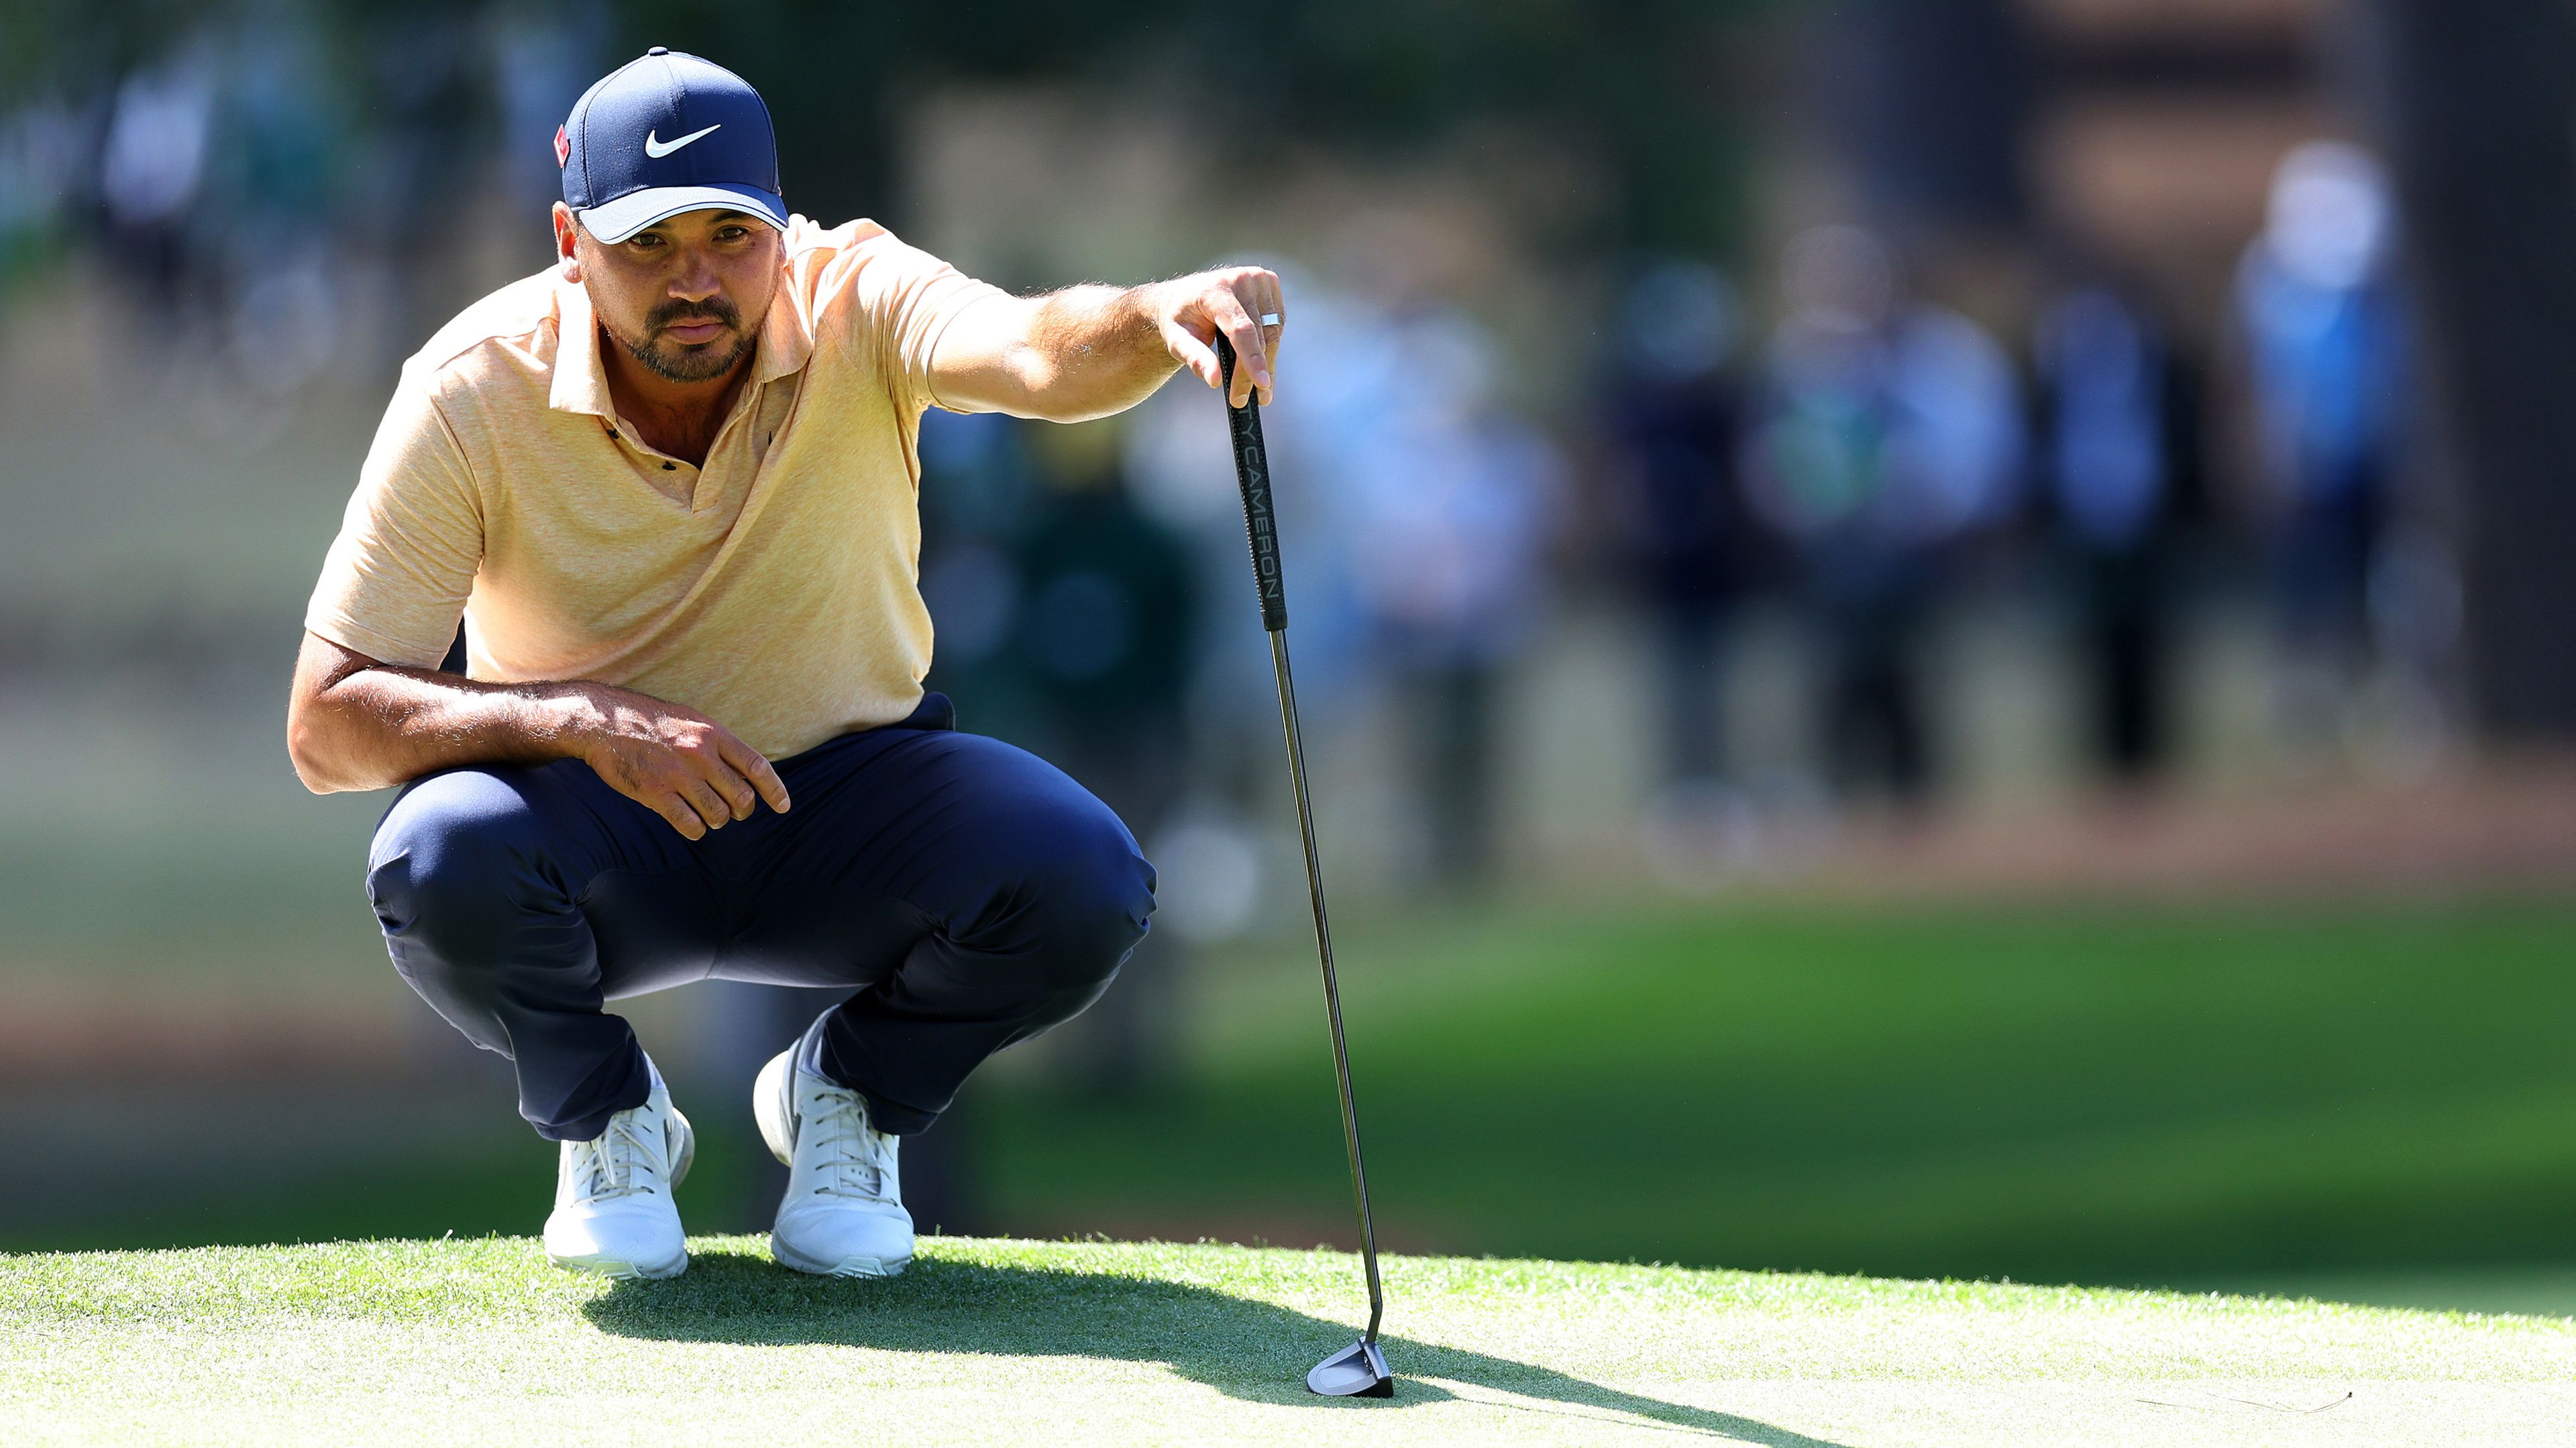 AUGUSTA, GEORGIA - APRIL 09: Jason Day of Australia looks over a putt on the seventh green during the final round of the 2023 Masters Tournament at Augusta National Golf Club on April 09, 2023 in Augusta, Georgia. (Photo by Andrew Redington/Getty Images)